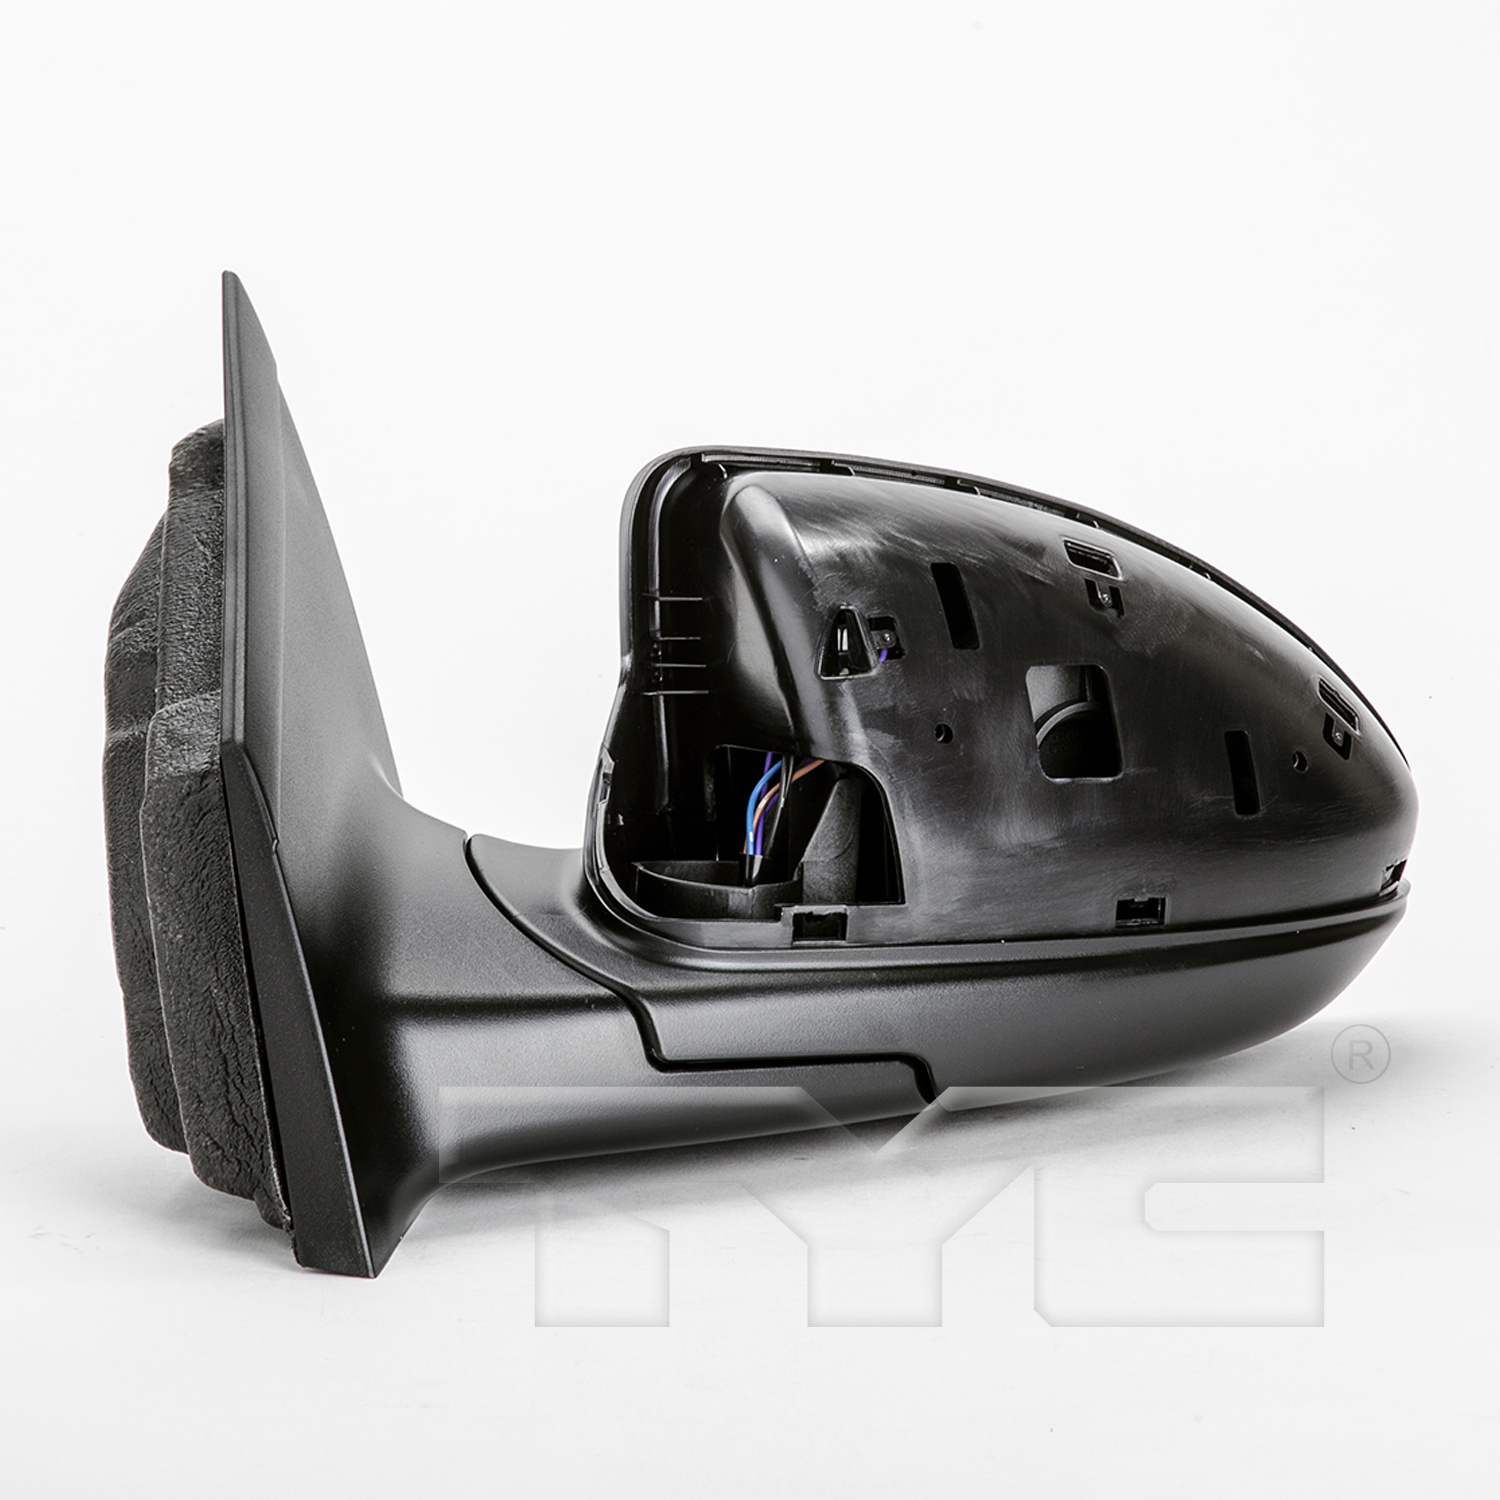 Aftermarket MIRRORS for CHEVROLET - CRUZE, CRUZE,11-15,LT Mirror outside rear view